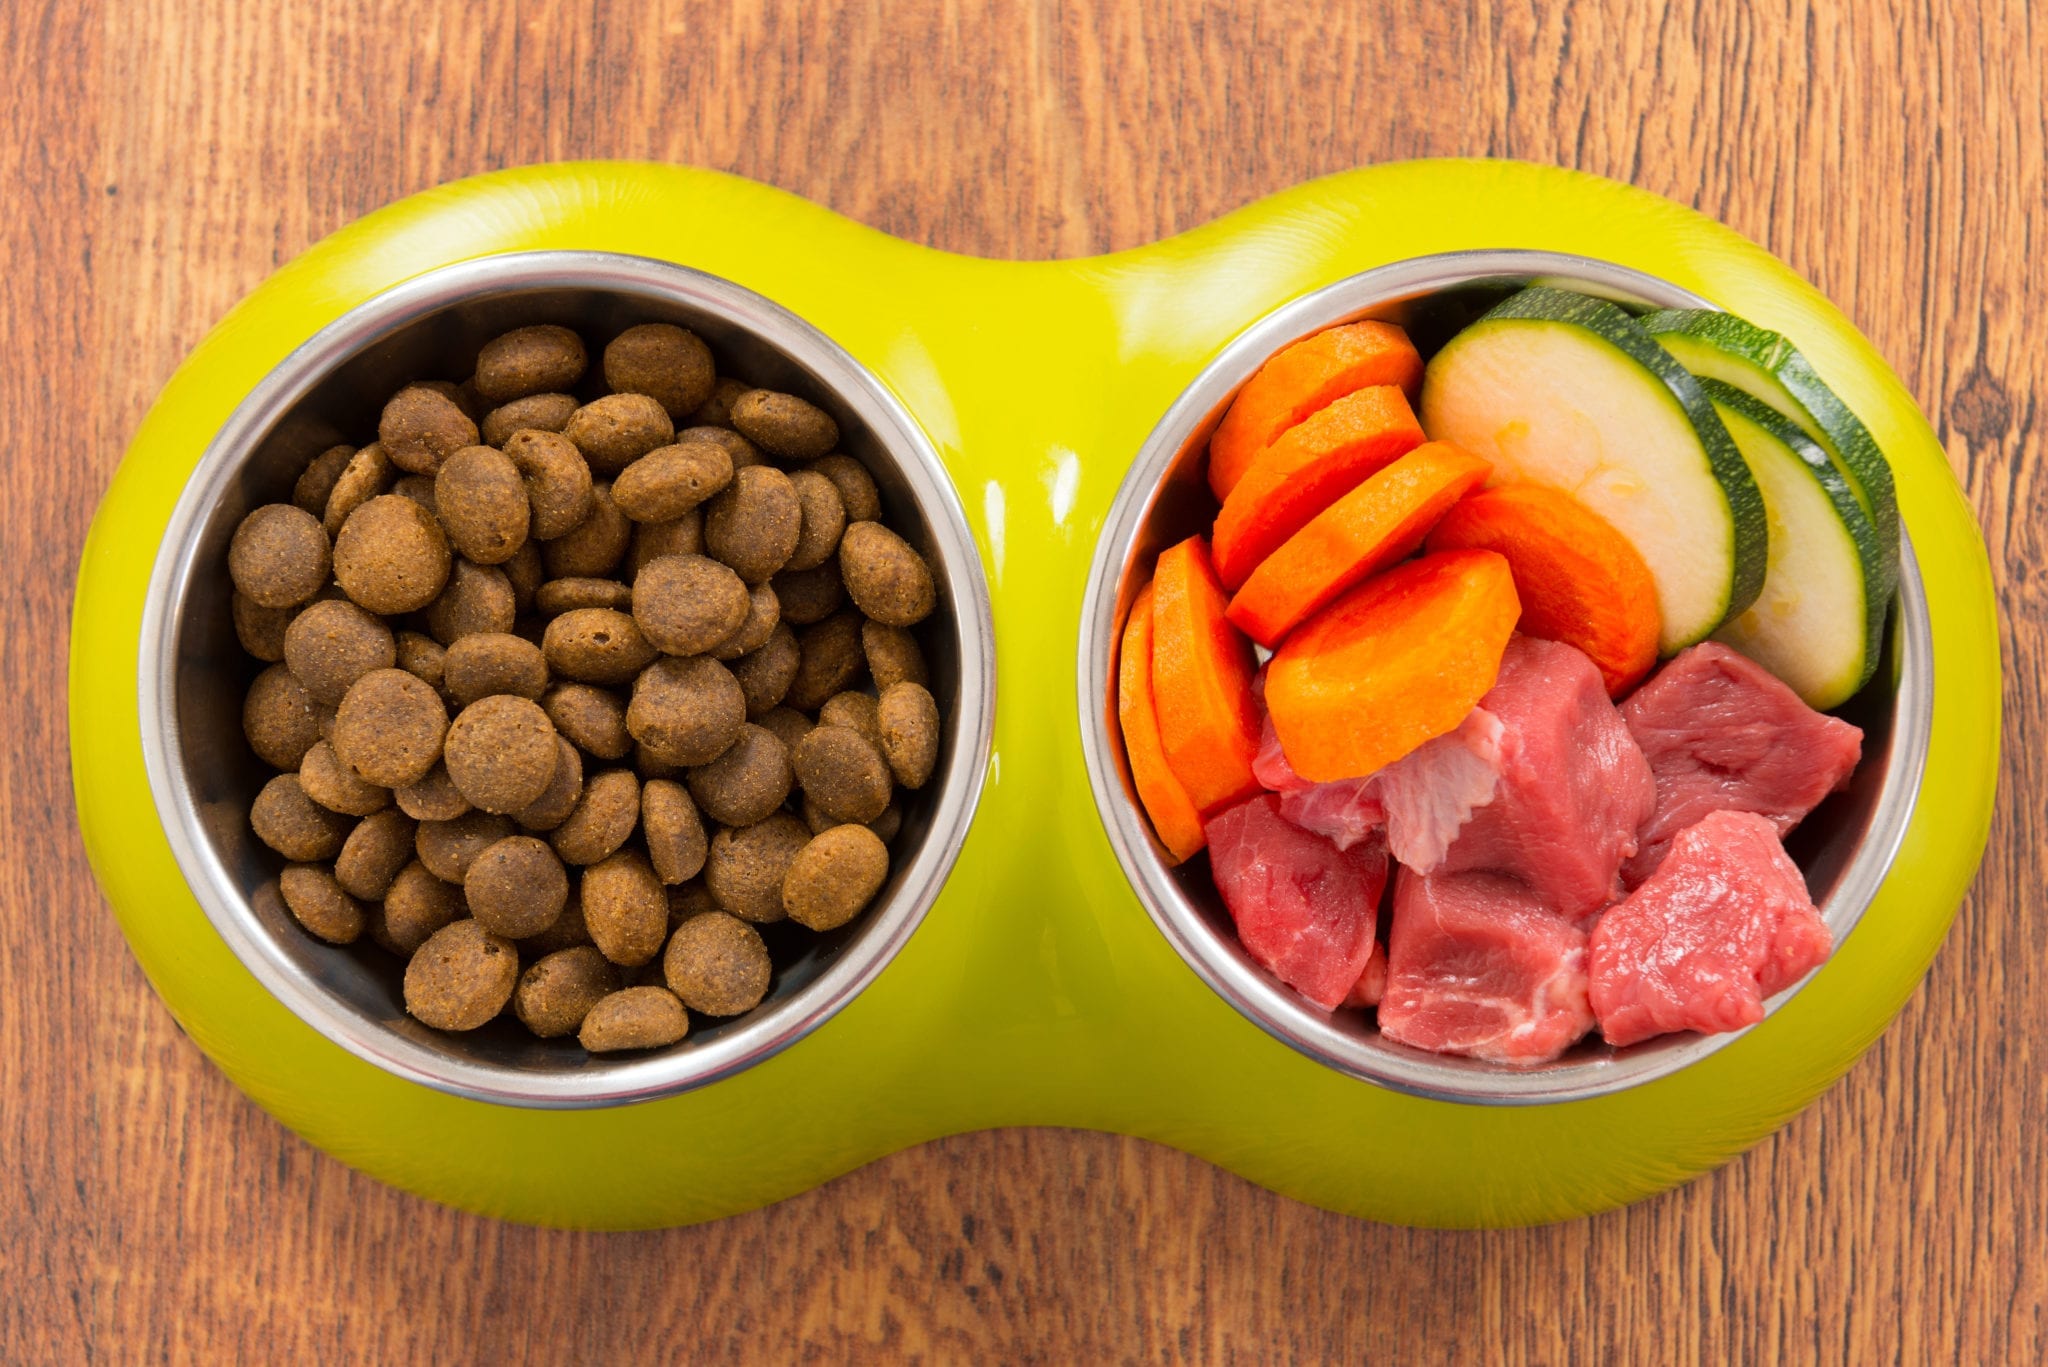 A healthy, balanced diet, even on holidays, is best for your dog